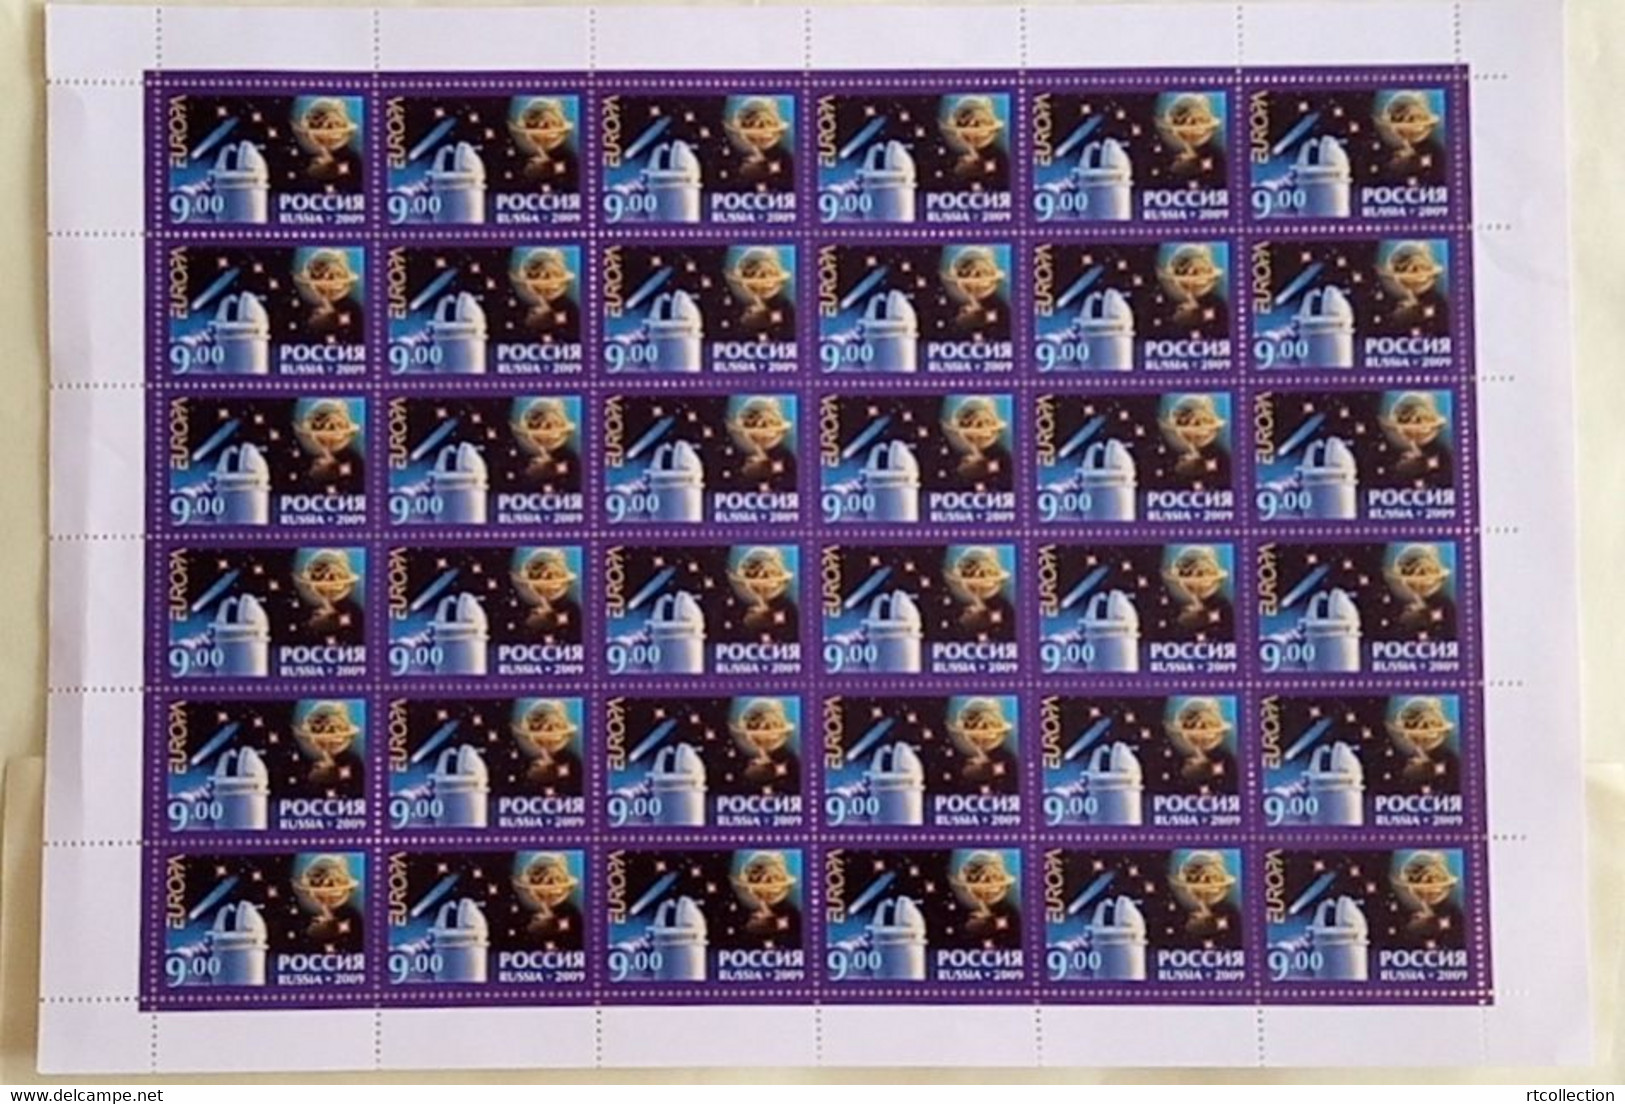 Russia 2009 Sheet Issue By Program Europe Europa-CEPT Europa Sciences Astronomy Space Telescope Stamps Edge Folded - Hojas Completas